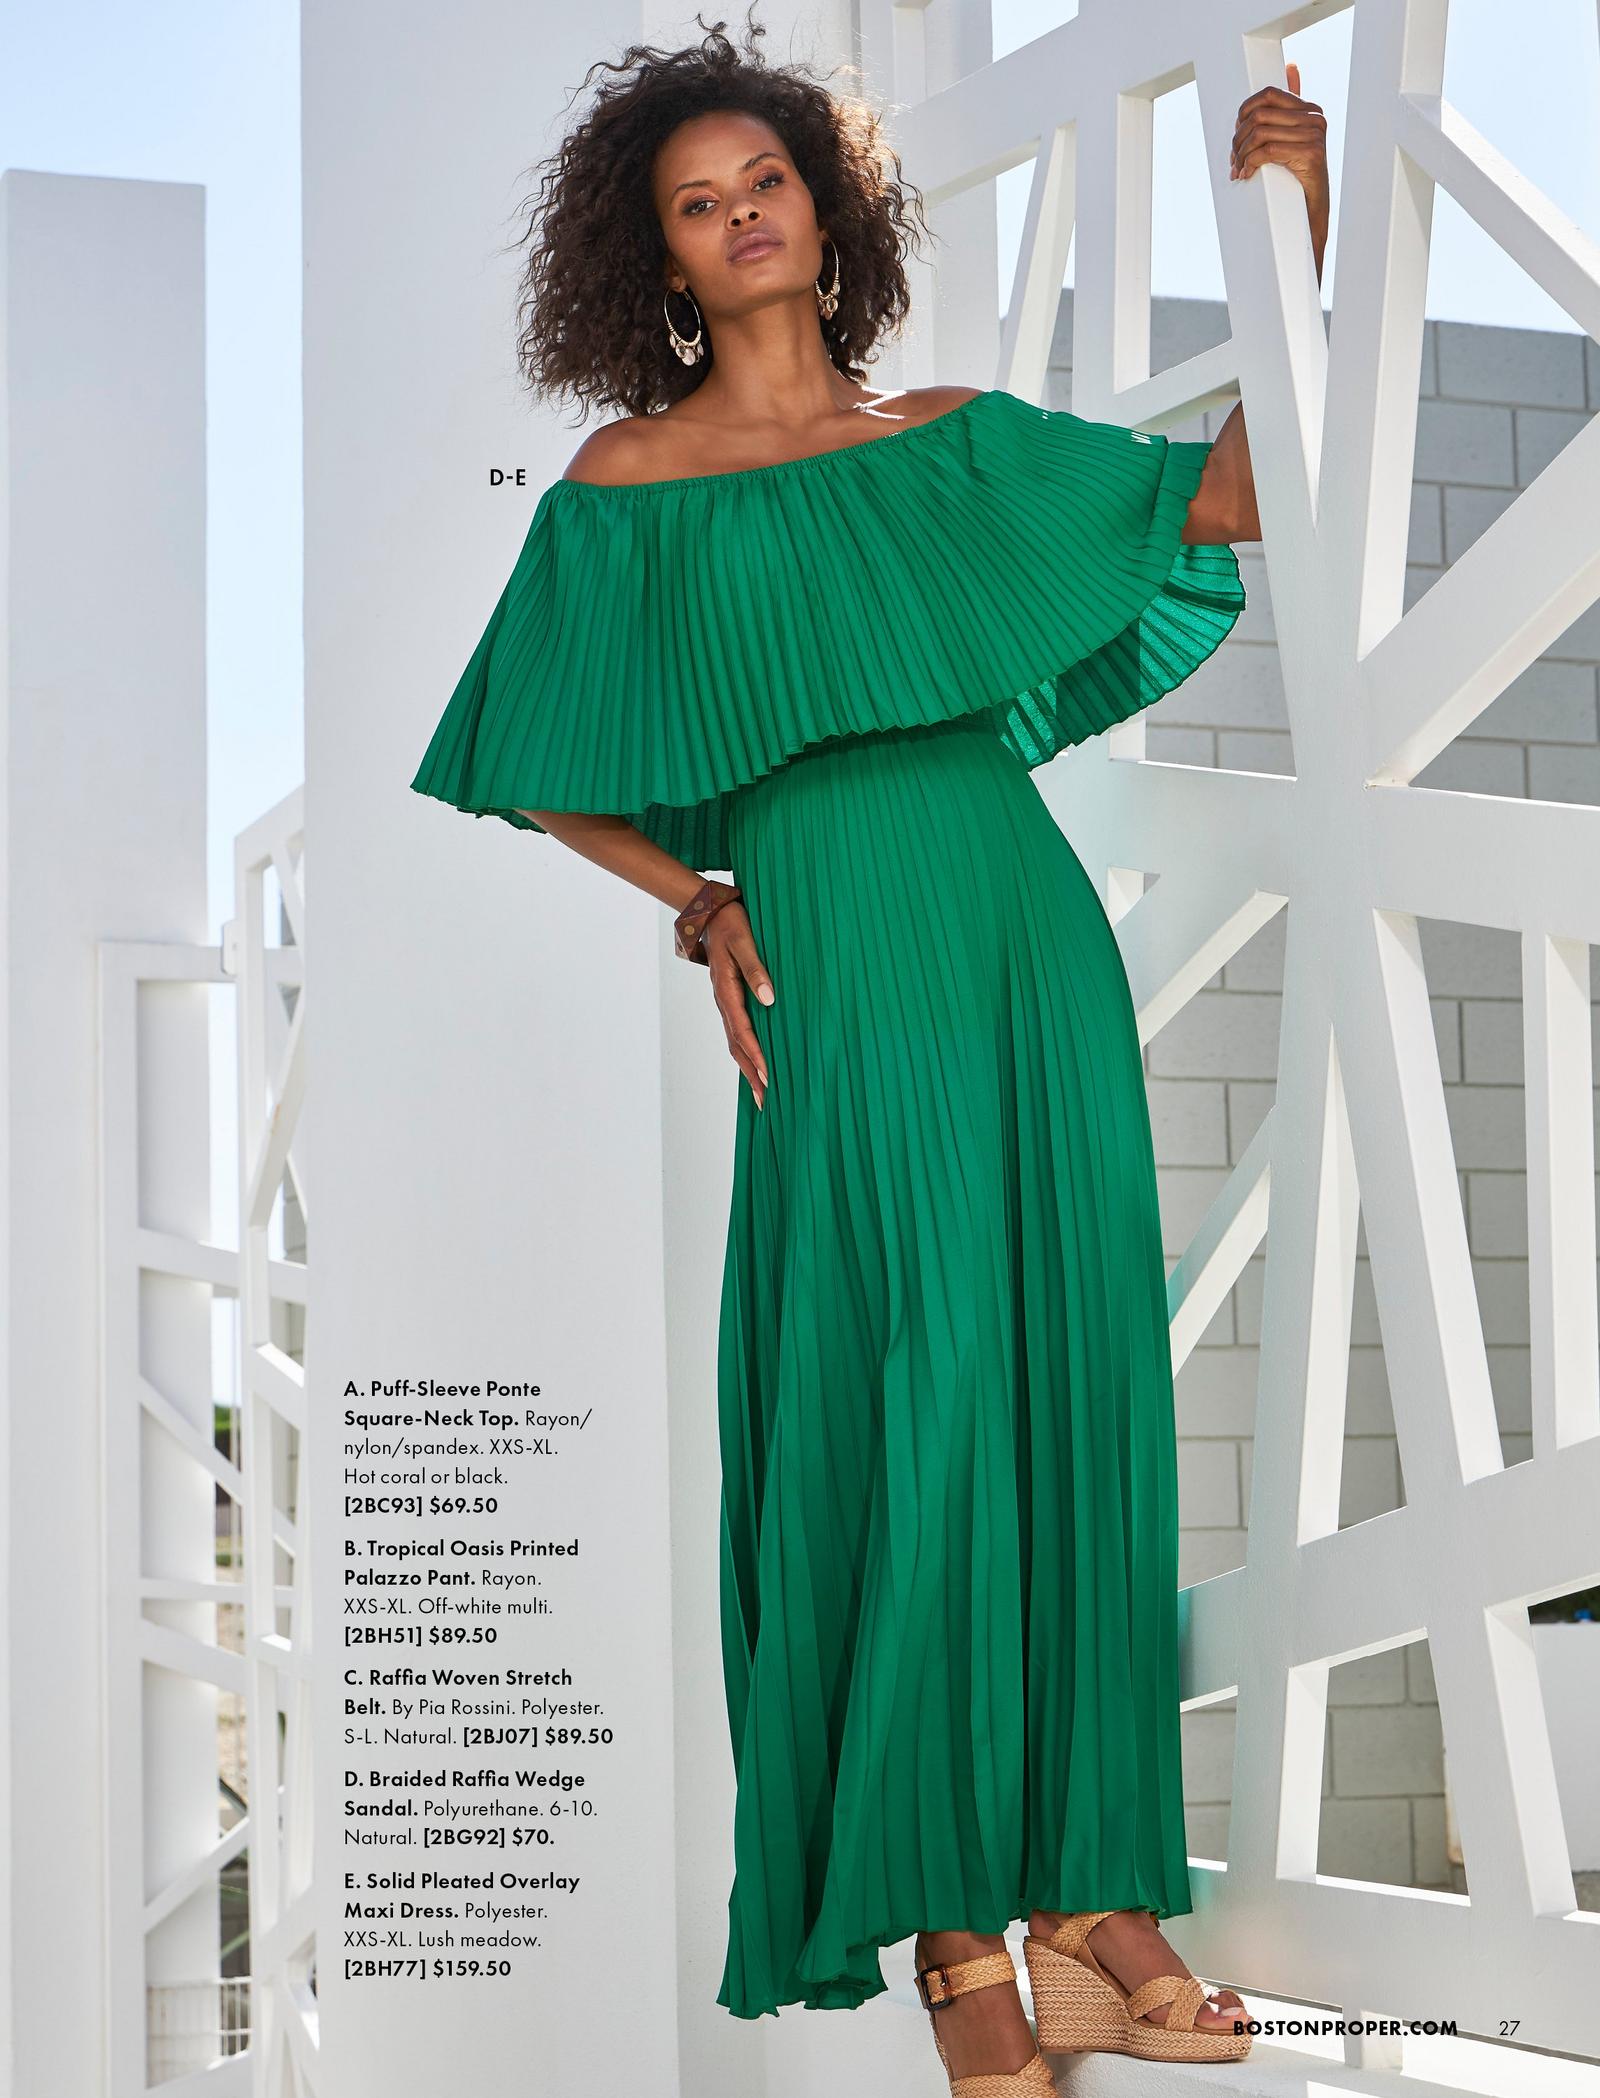 model wearing a green pleated off-the-shoulder maxi dress and tan wedges.